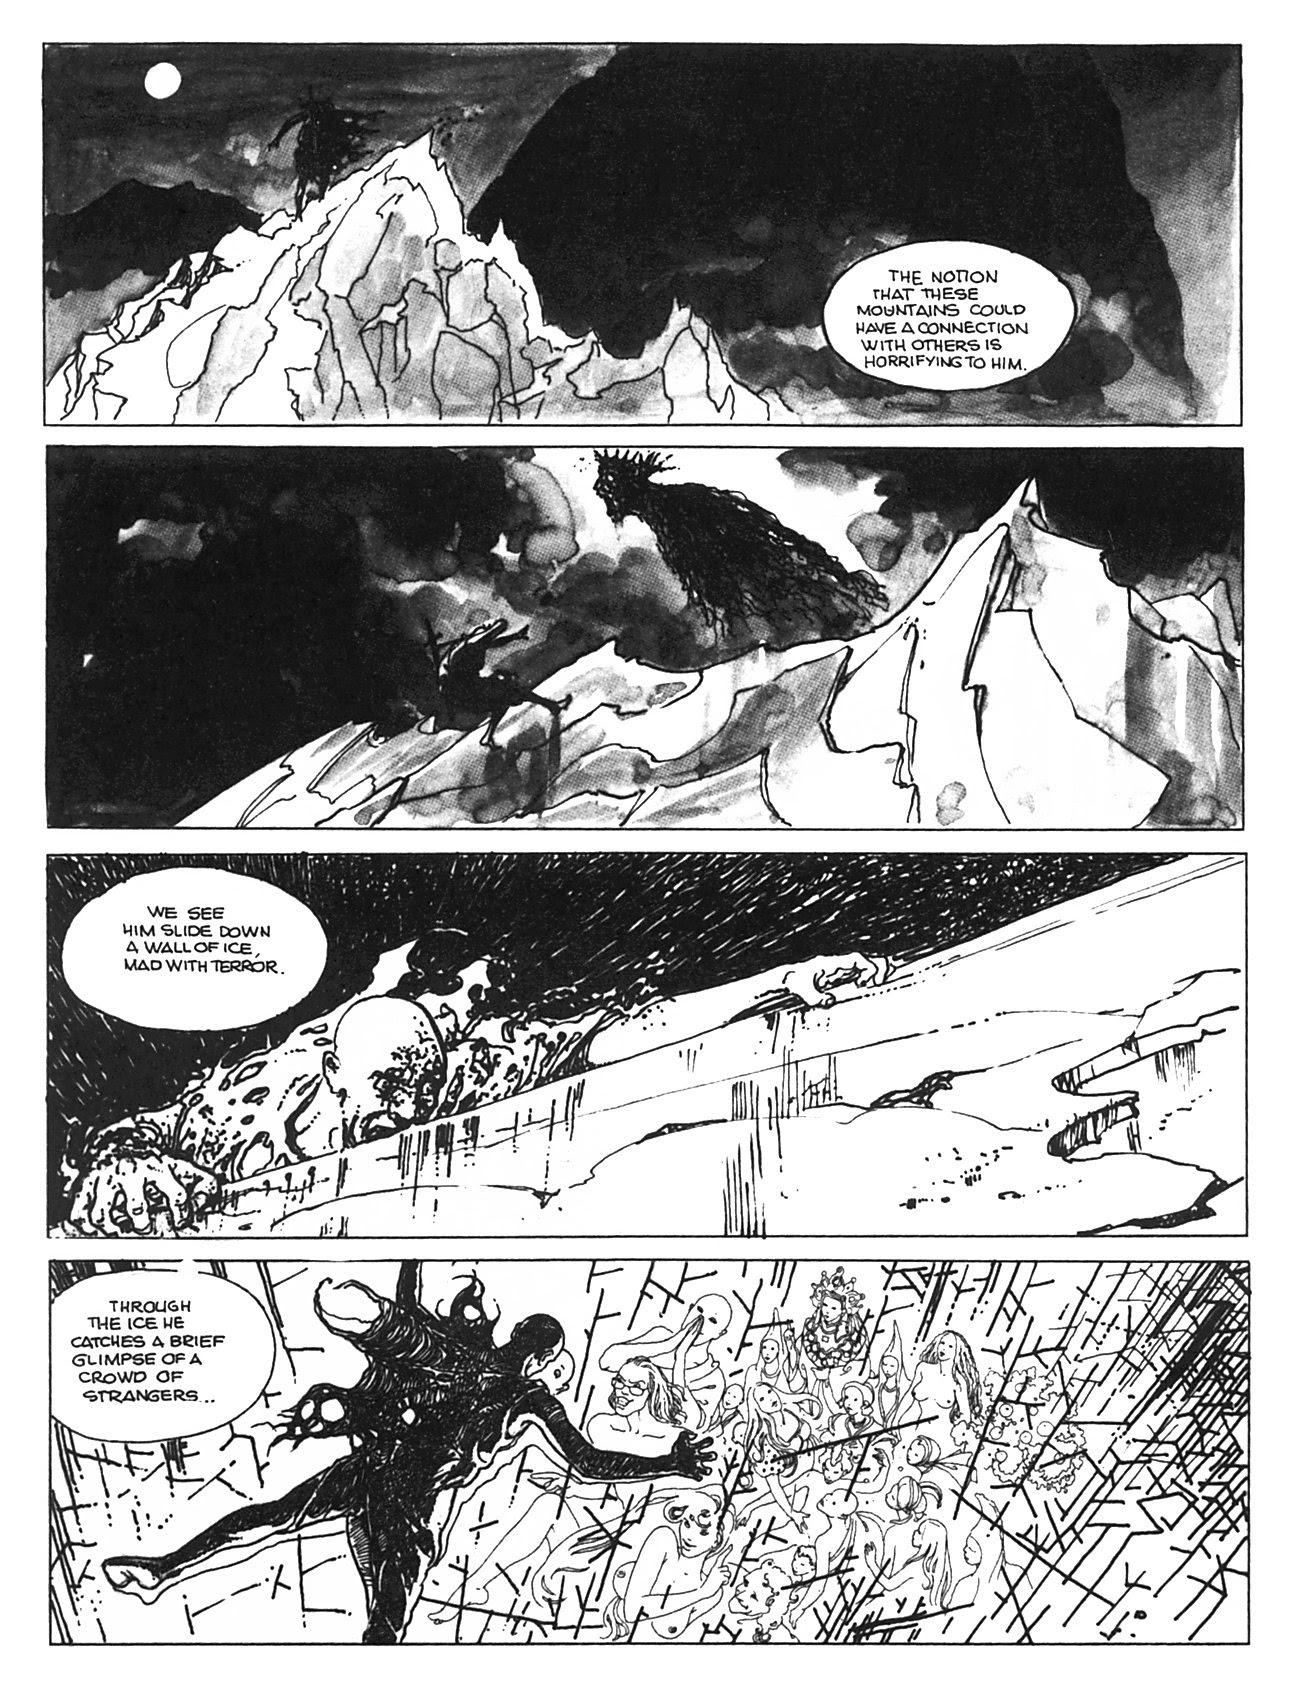 Read online Perchance to dream - The Indian adventures of Giuseppe Bergman comic -  Issue # TPB - 105